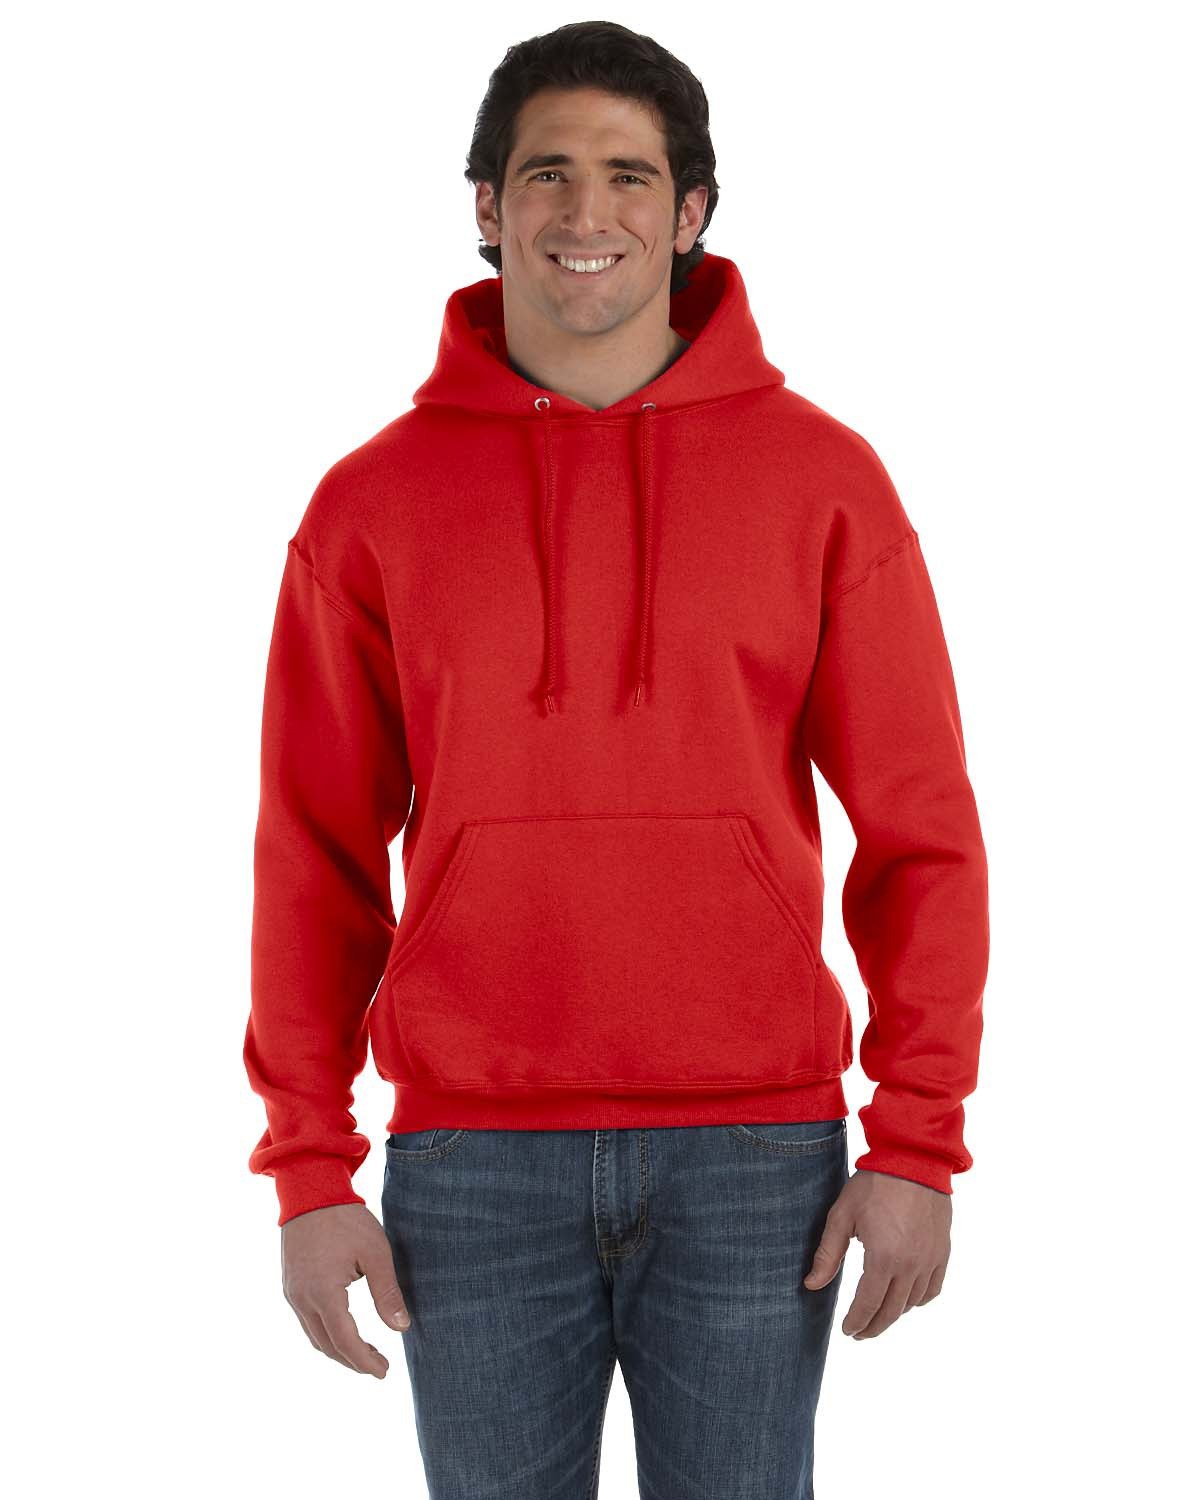 Front view of Adult Supercotton™ Pullover Hooded Sweatshirt